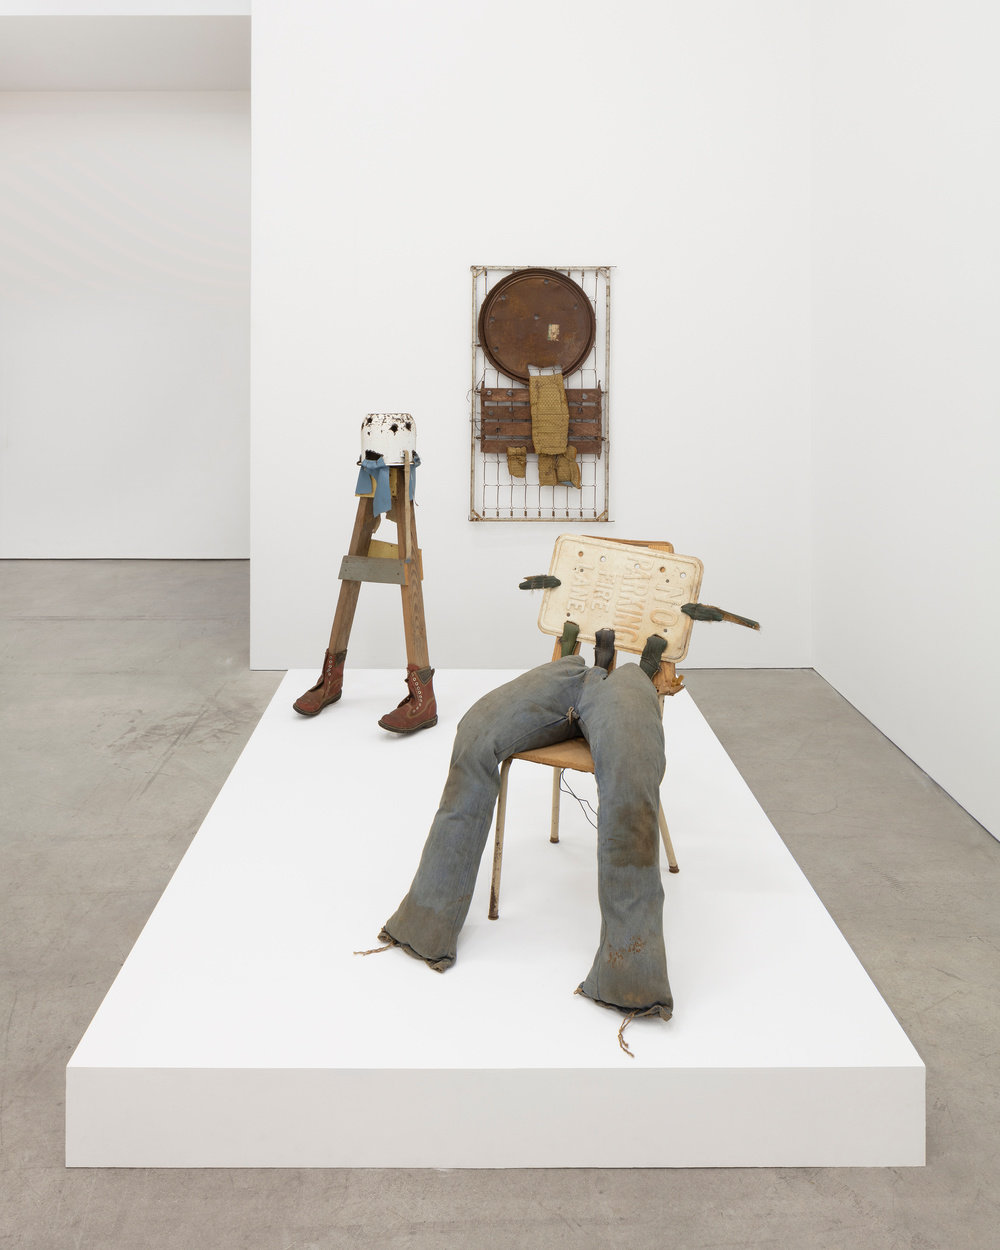 An installation view of three sculptures of found-object construction by Hawkins Bolden. Two sculptures appear as anthropomorphic figures on a white platform base. The first in the foreground sits on a wood seat school chair. A faded "No Parking" sign makes the torso of the figure with a strip of tire protruding on the left and right edges. Muddied pants extend down from the chair and are stuffed to give them form. On the back end of the platform the sculpture appears standing on two 4" x 4" wood planks fitted with brown leather work boots. A rusted pot sits upside down on the wood planks and is cut with holes that appear as a face. Blue leather swatches hang from the mouth of the pot and other areas around the rim of the pot. The third sculpture appears mounted on the back gallery wall. 